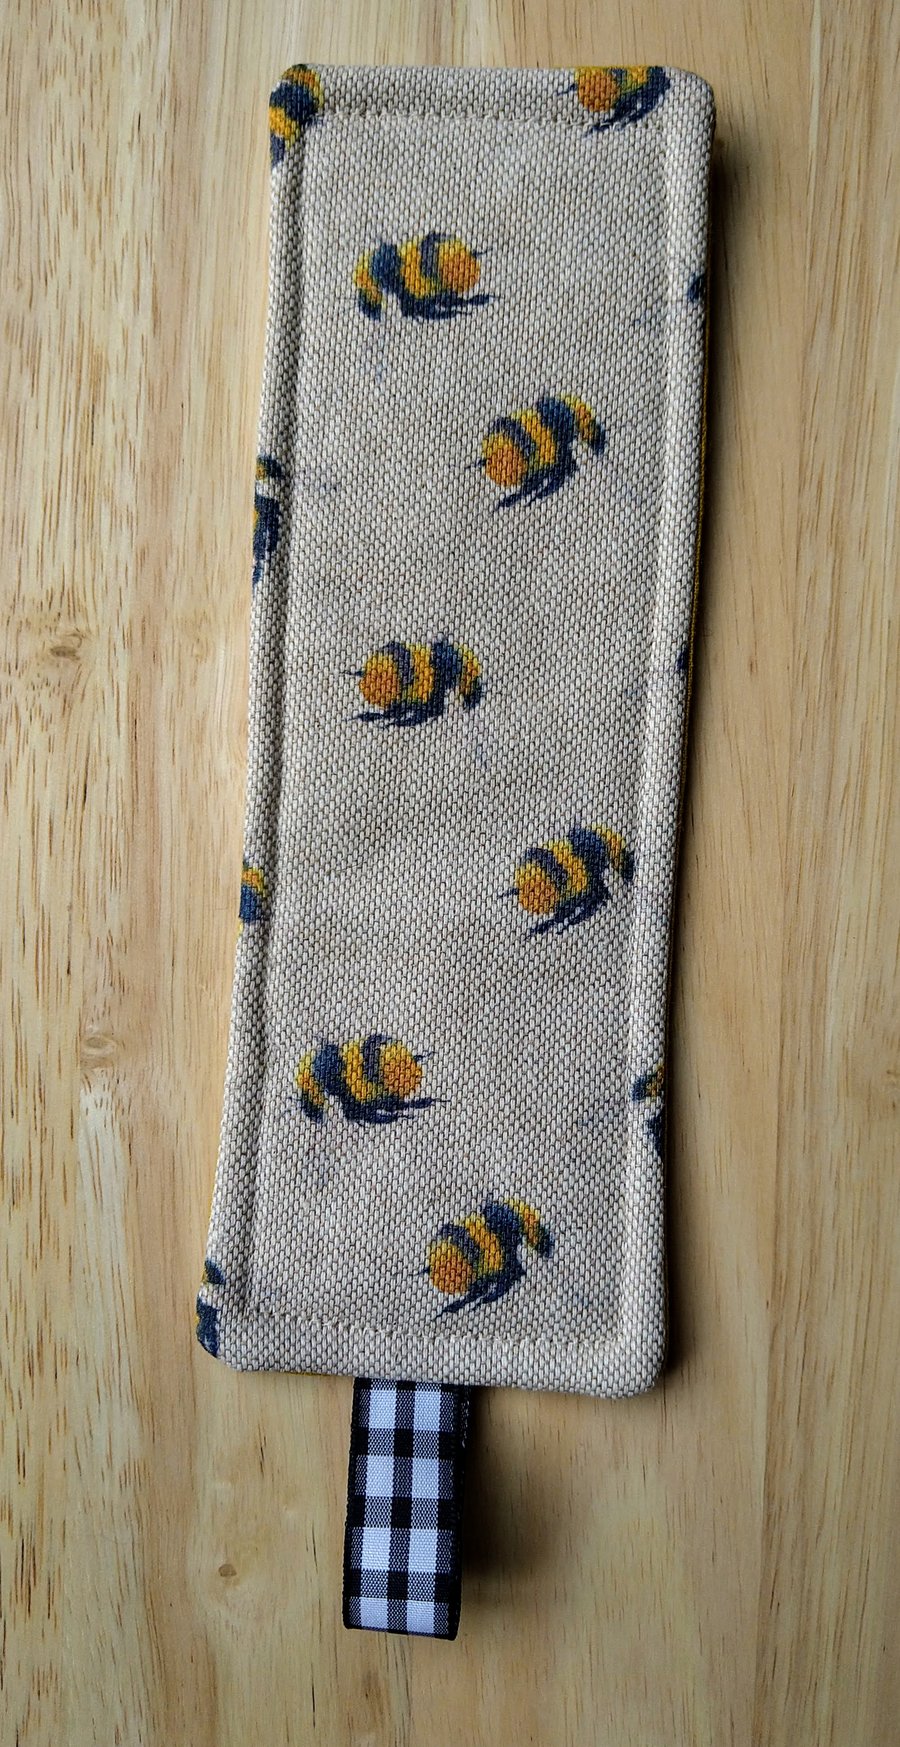 Bookmark with bees